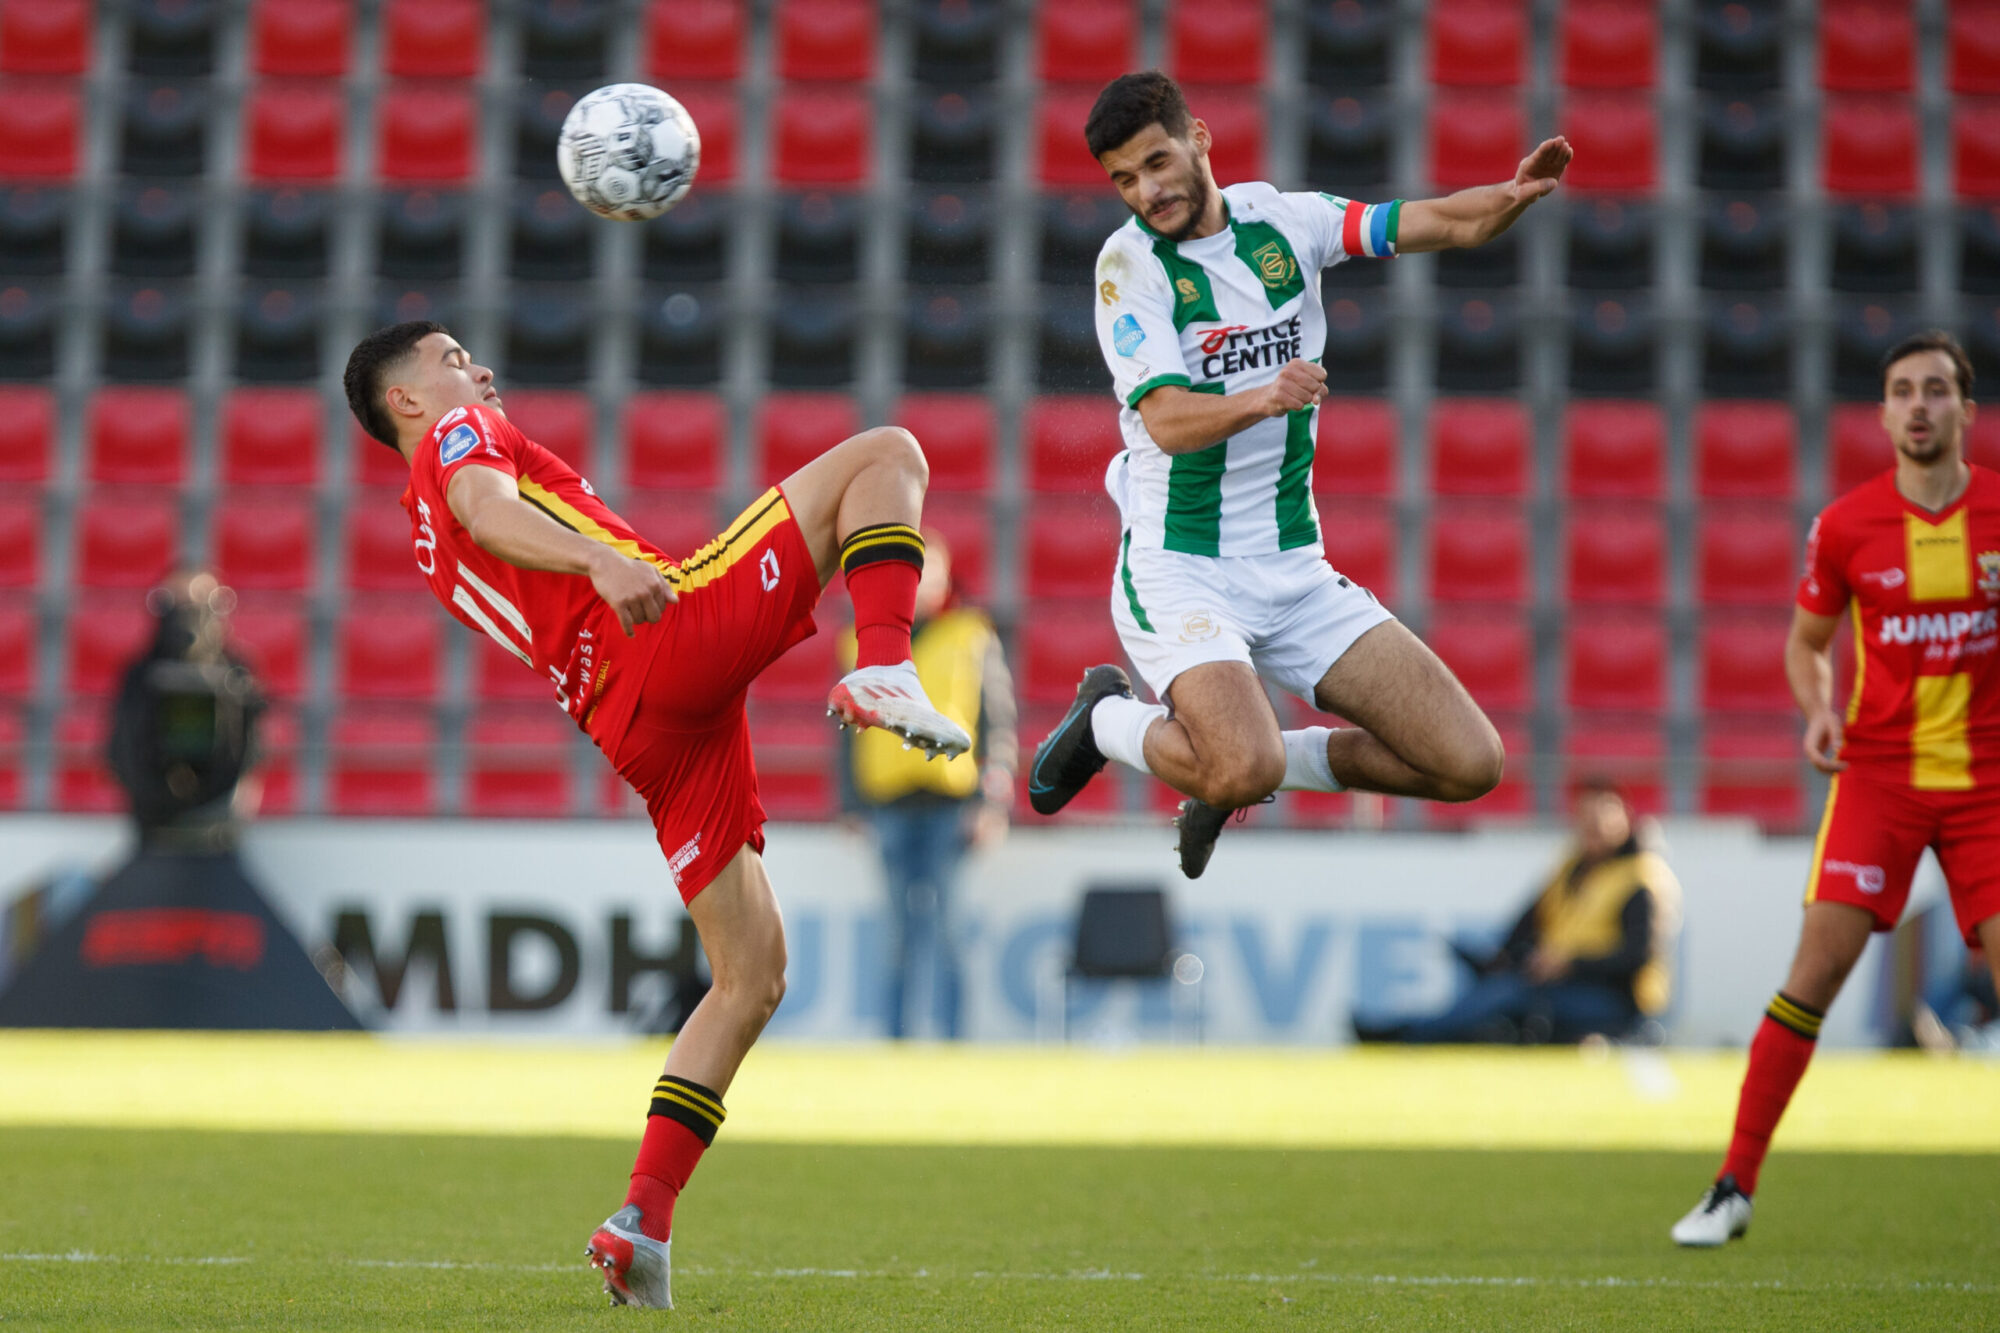 Puntloze missie voor Go Ahead Eagles in kille ambiance